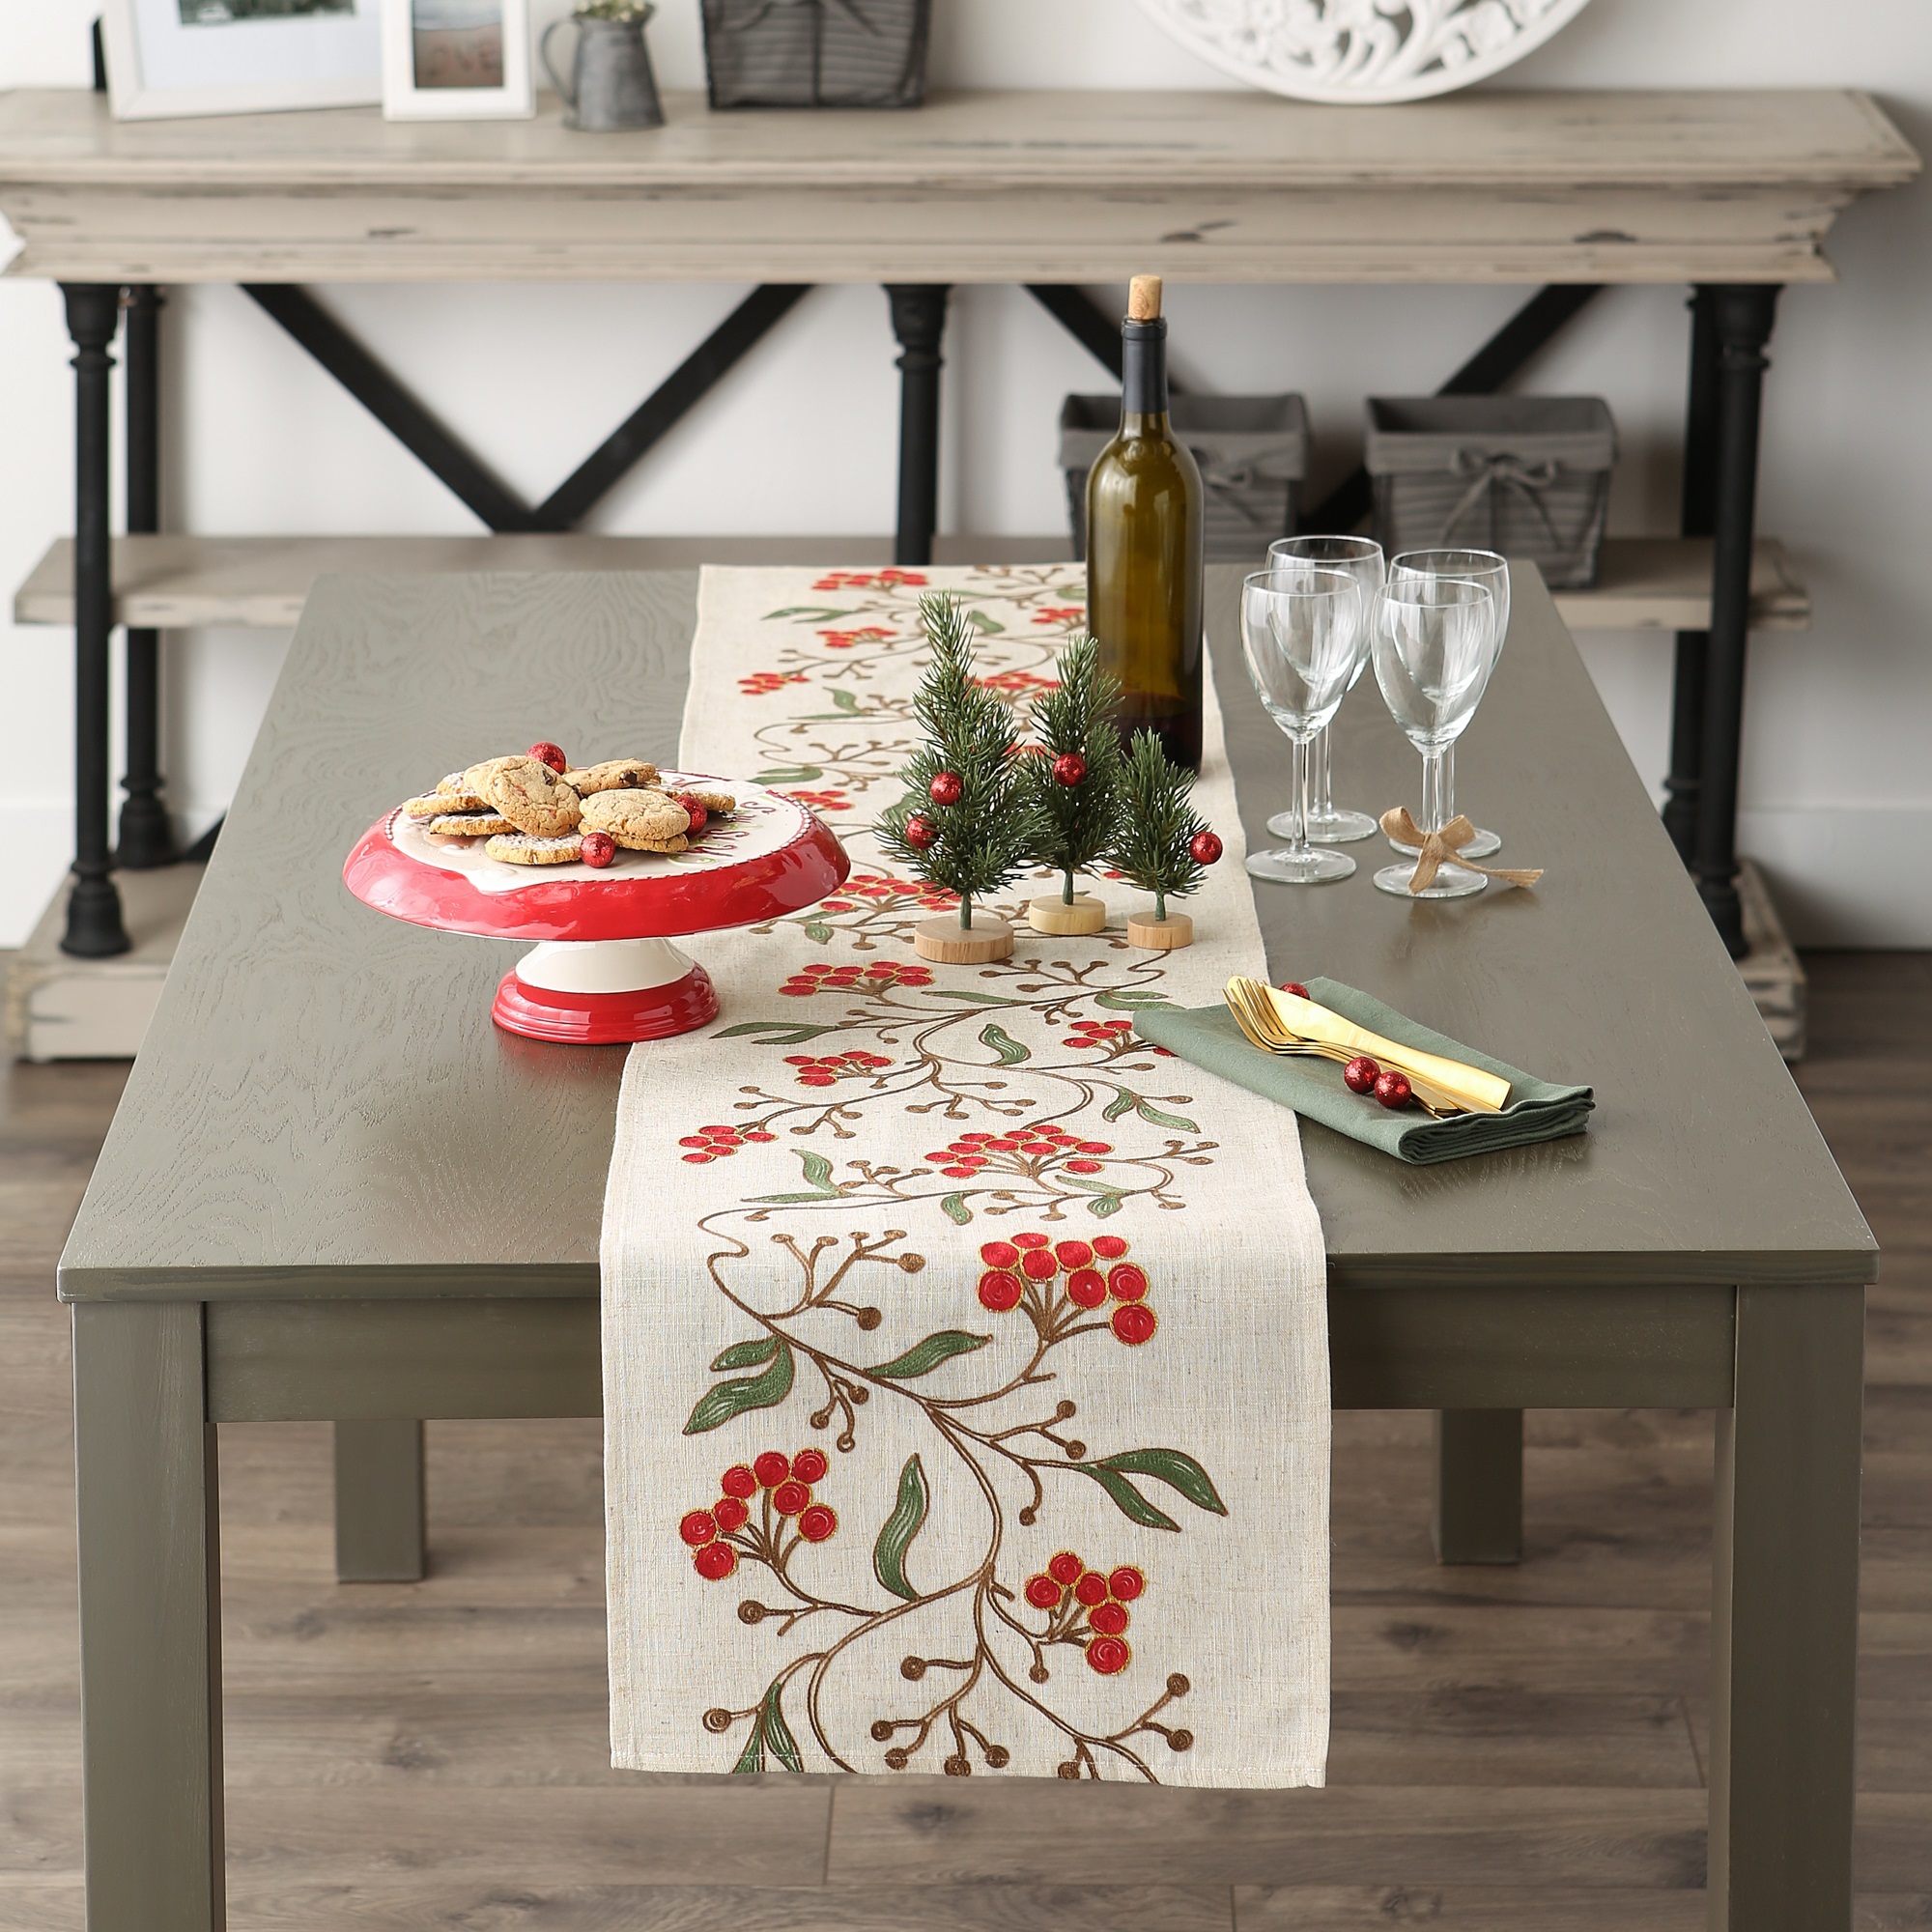 Design Imports DII Winter Berries Embroidered Table Runner 14x70